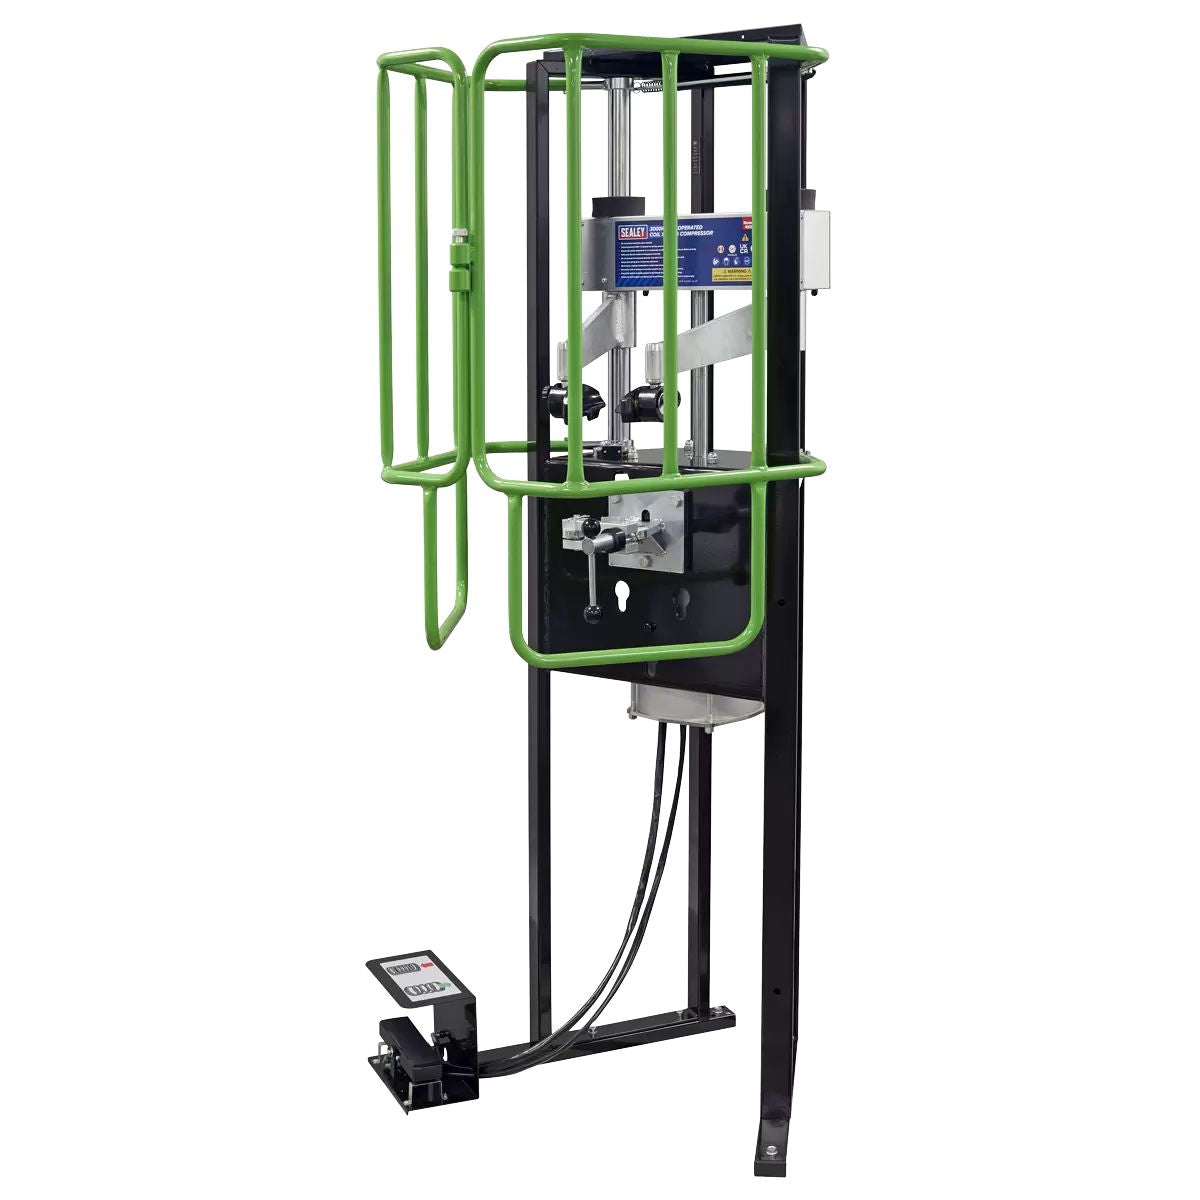 Sealey RE3000 Air Operated Coil Spring Compressor 3000kg